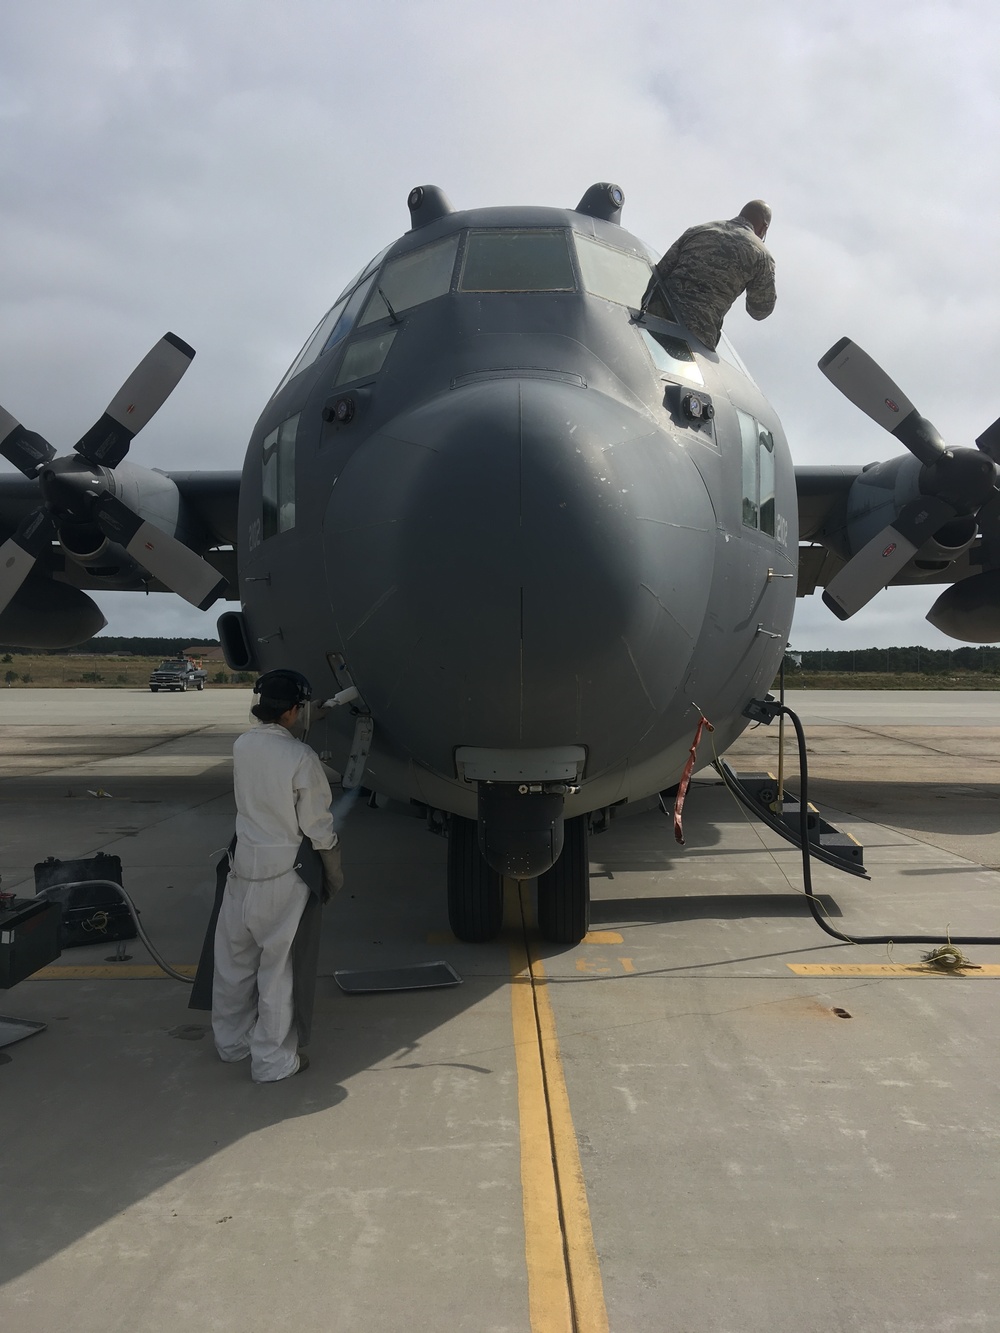 106th Rescue Wing prepares to deploy for Hurricane Michael response